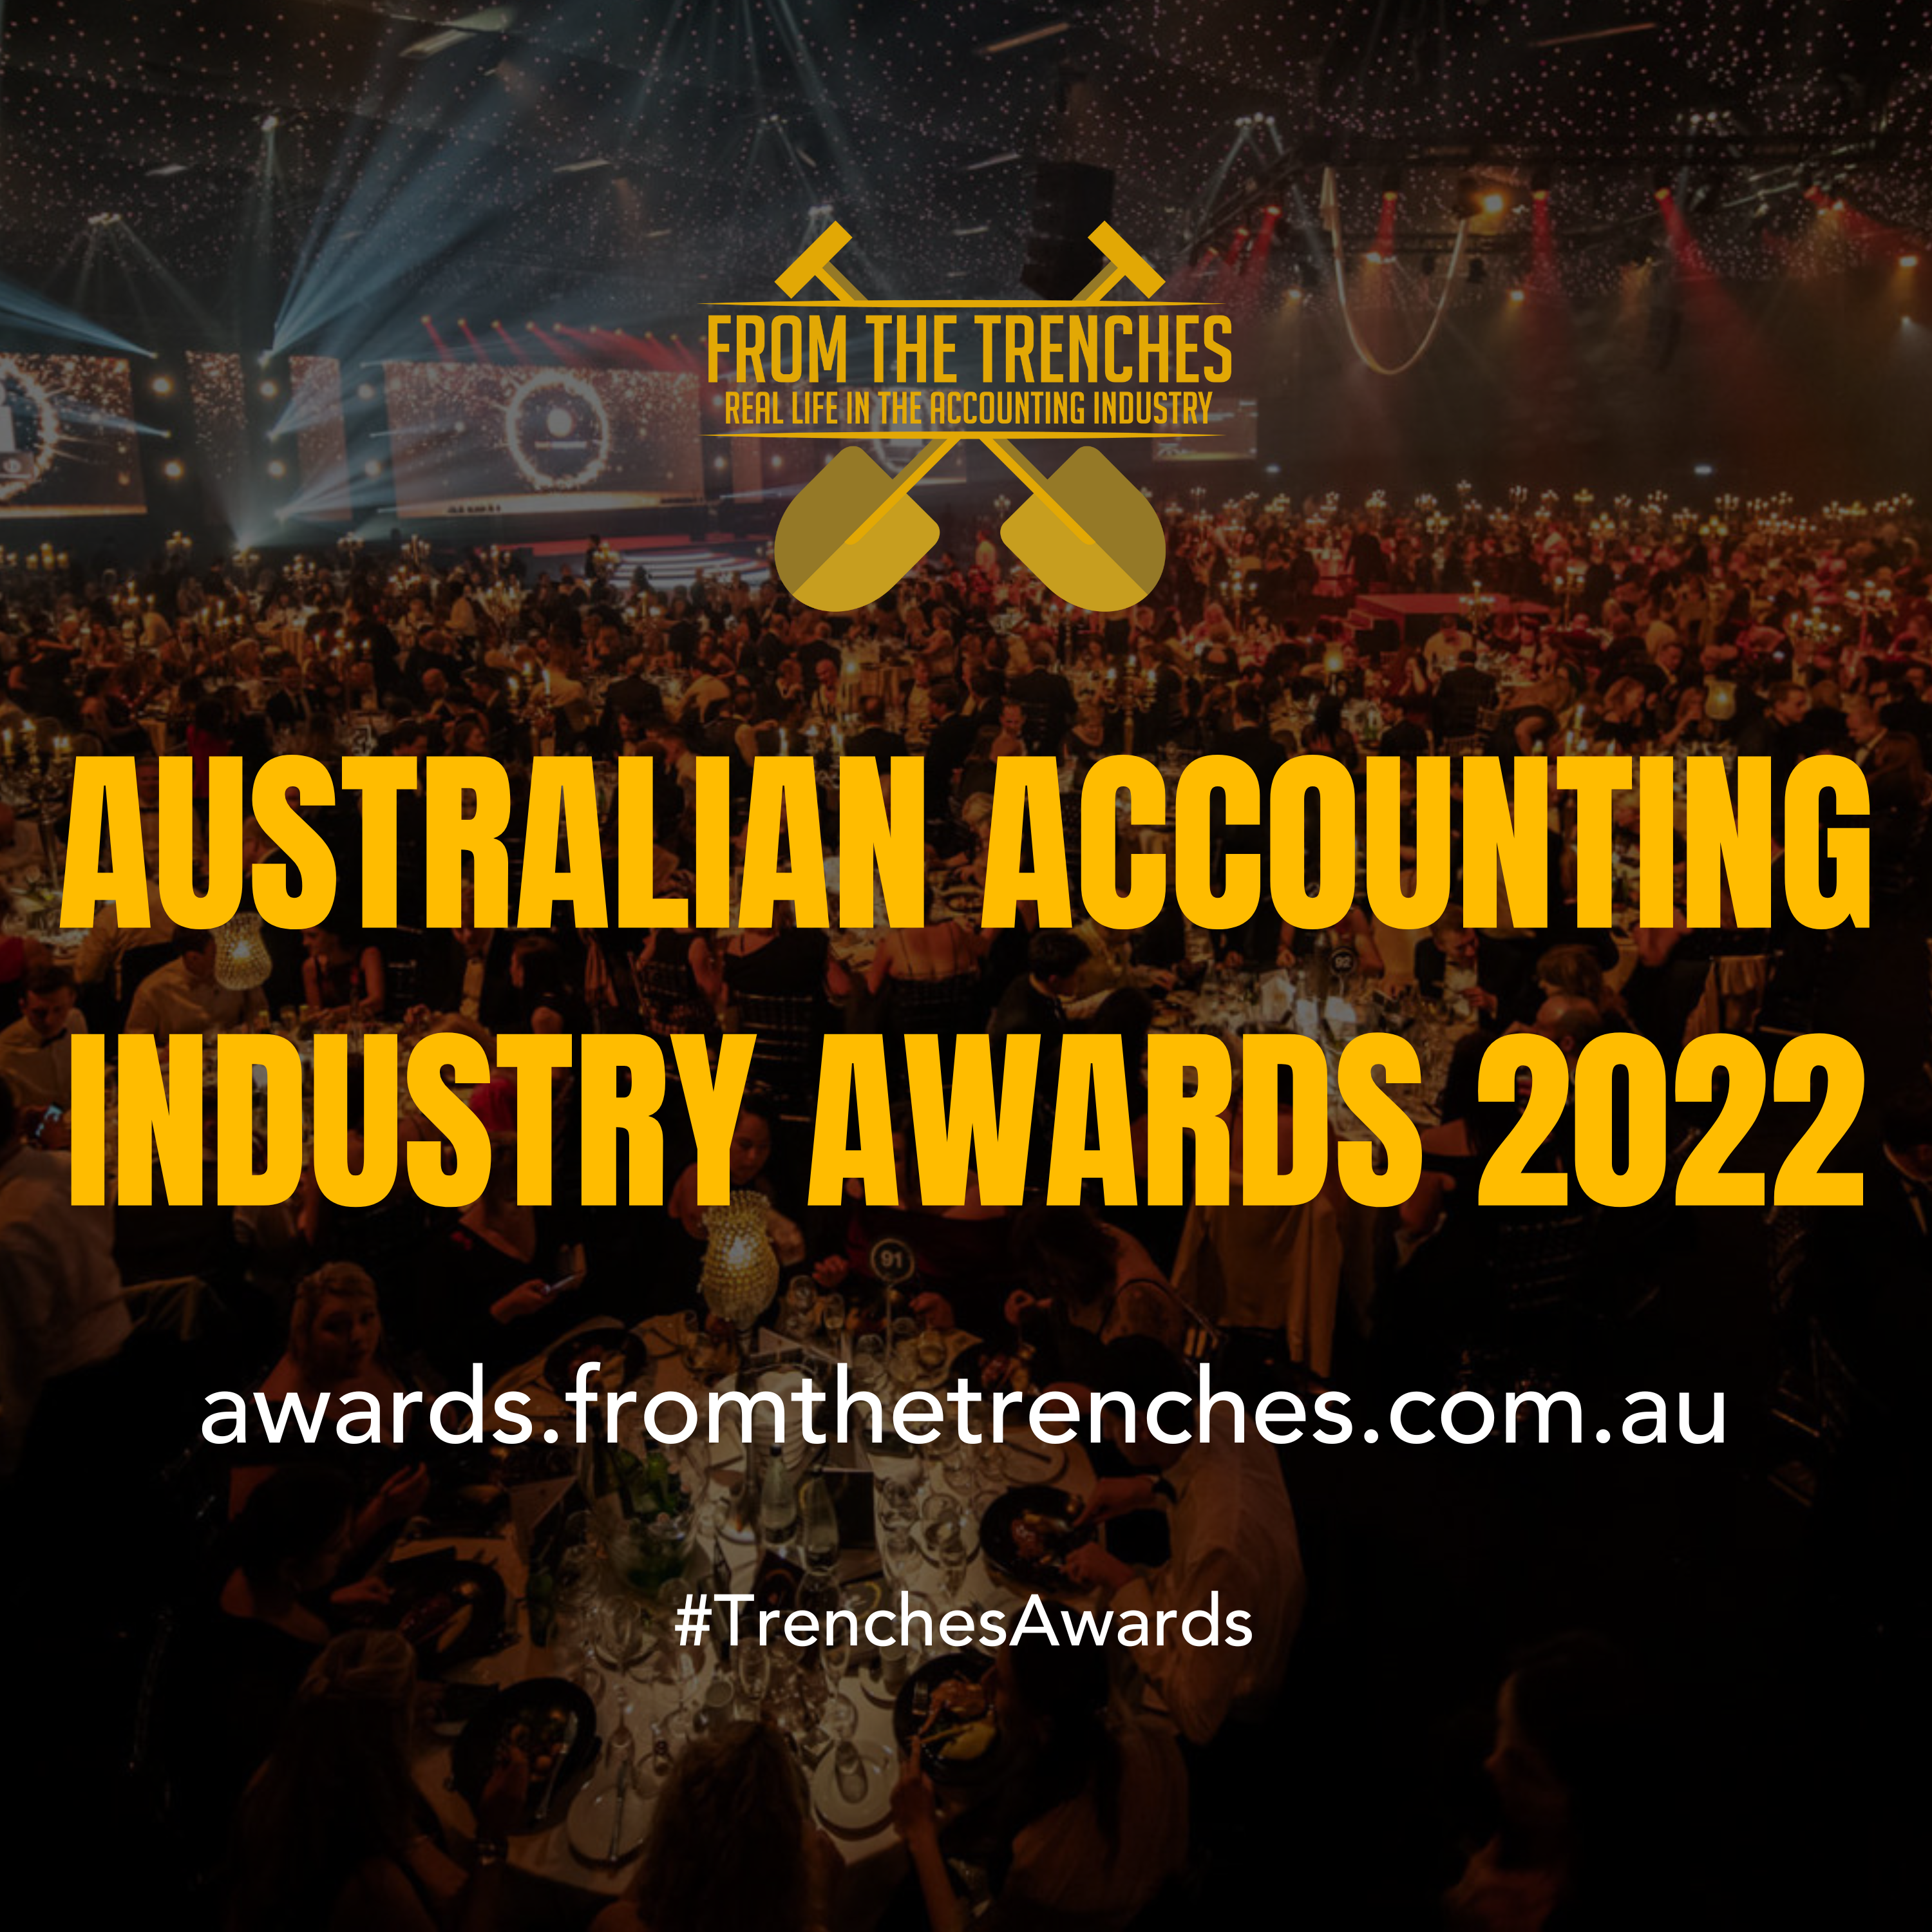 Why did we launch the Australian Accounting Industry Awards?